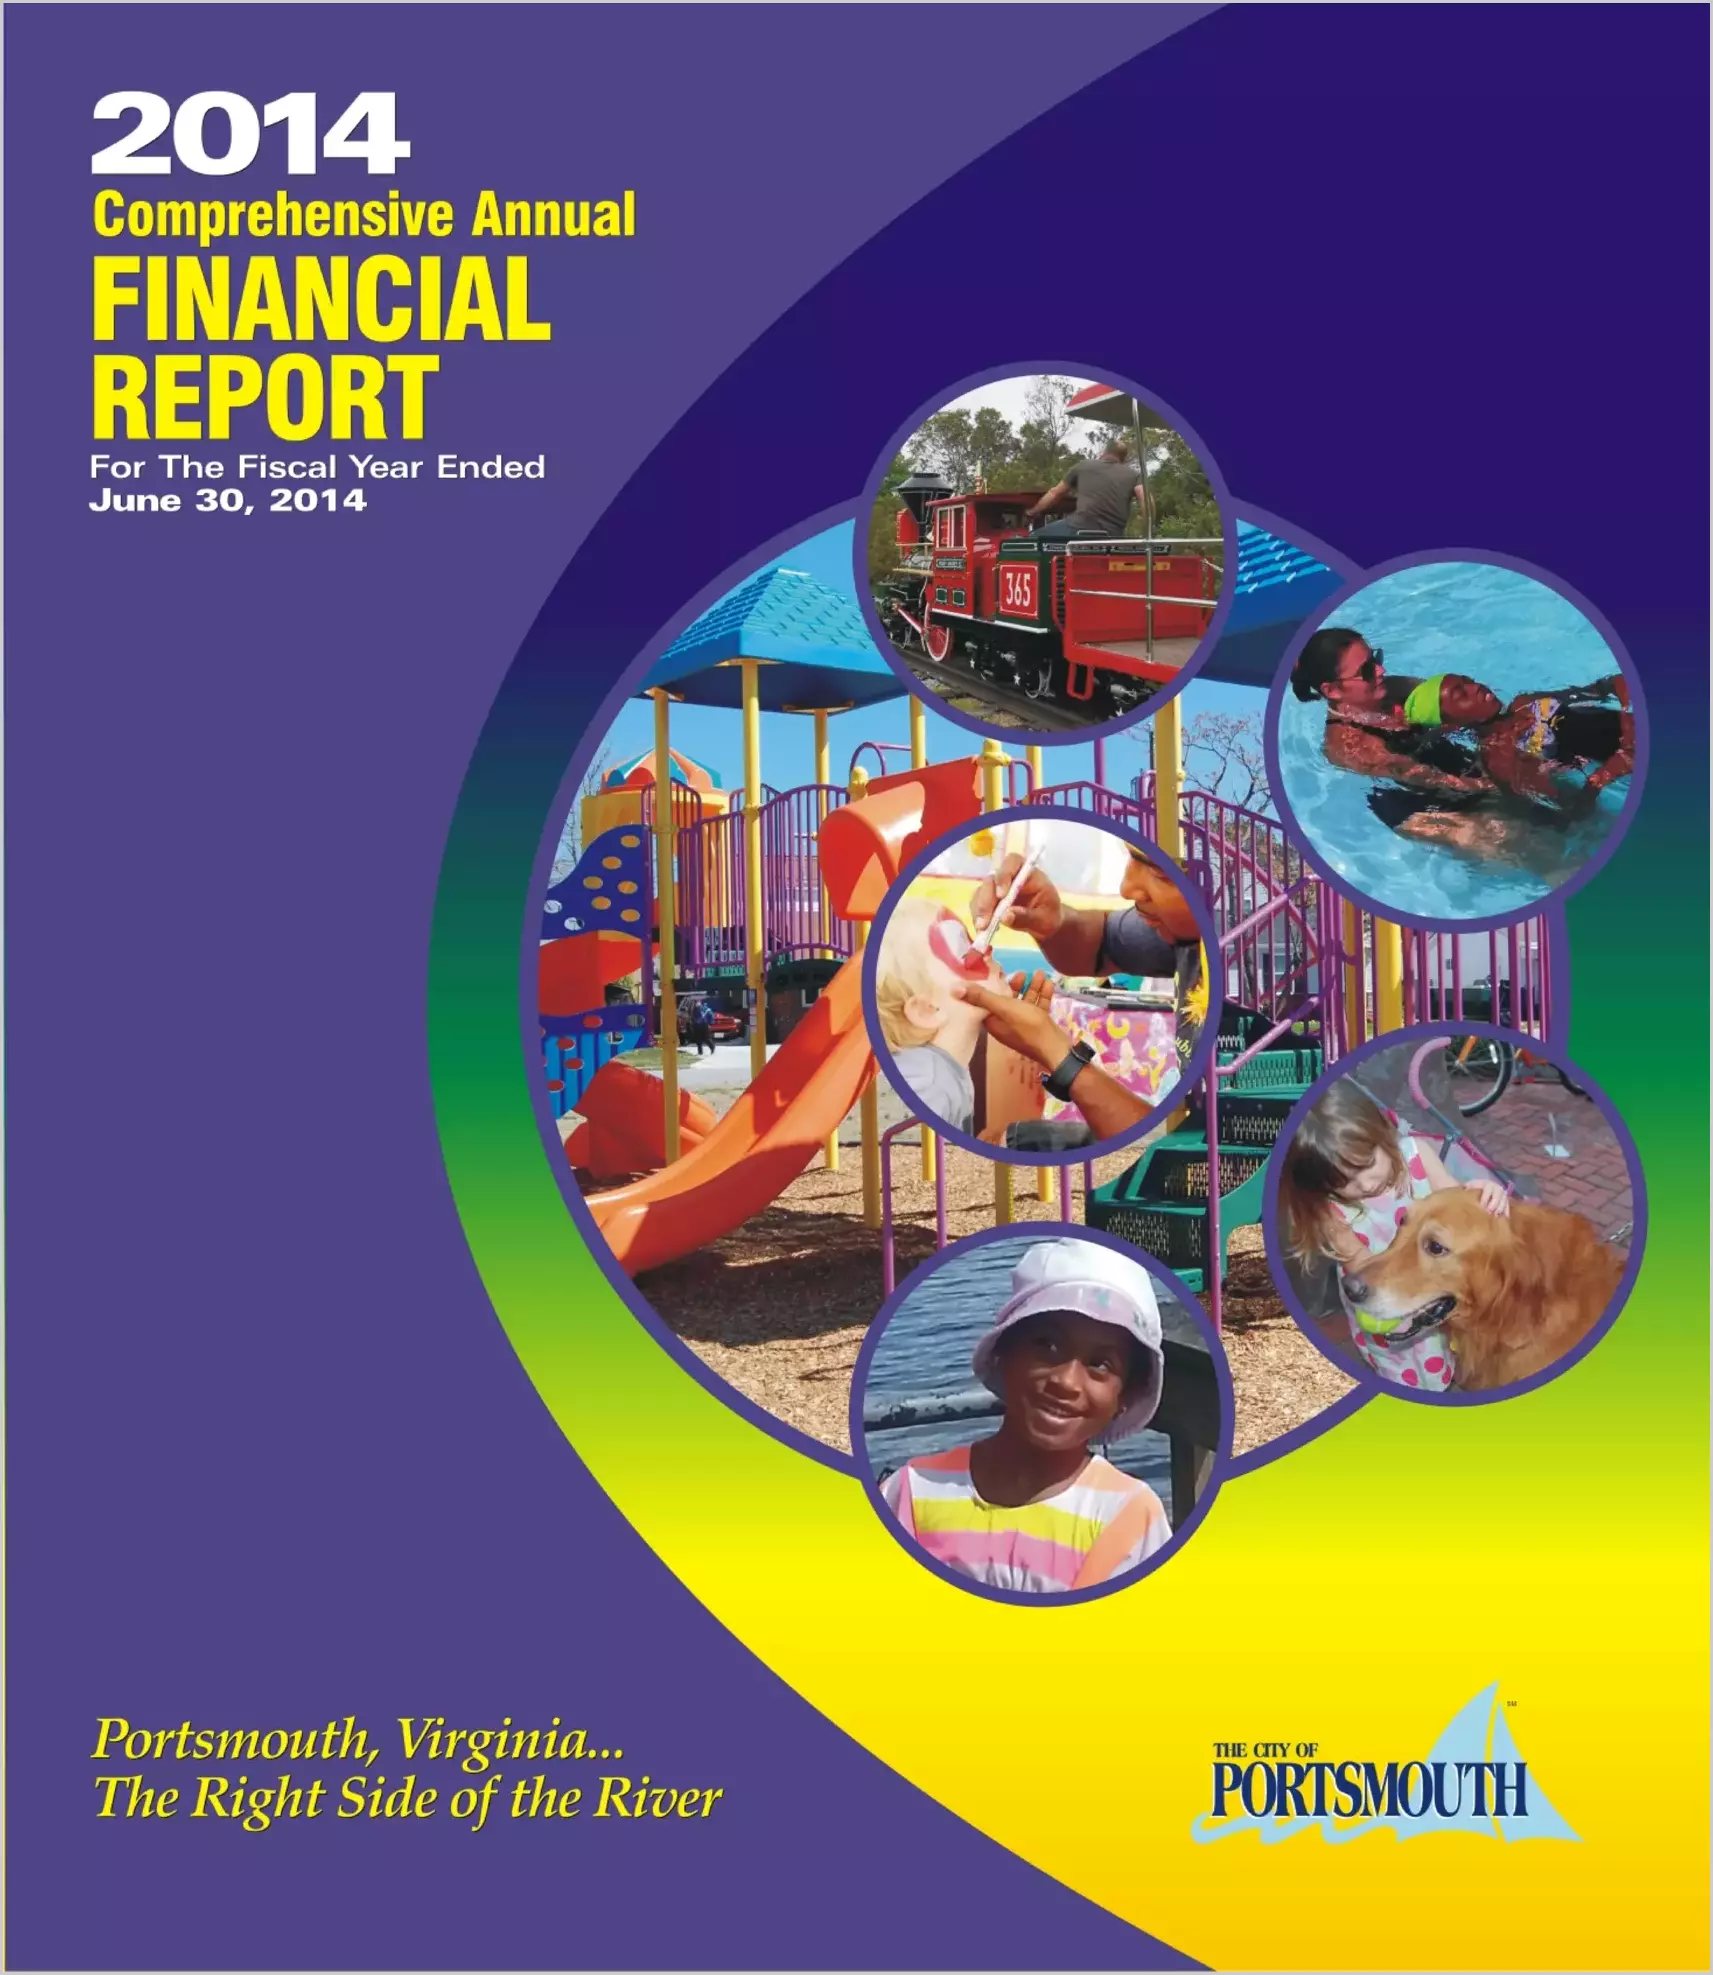 2014 Annual Financial Report for City of Portsmouth